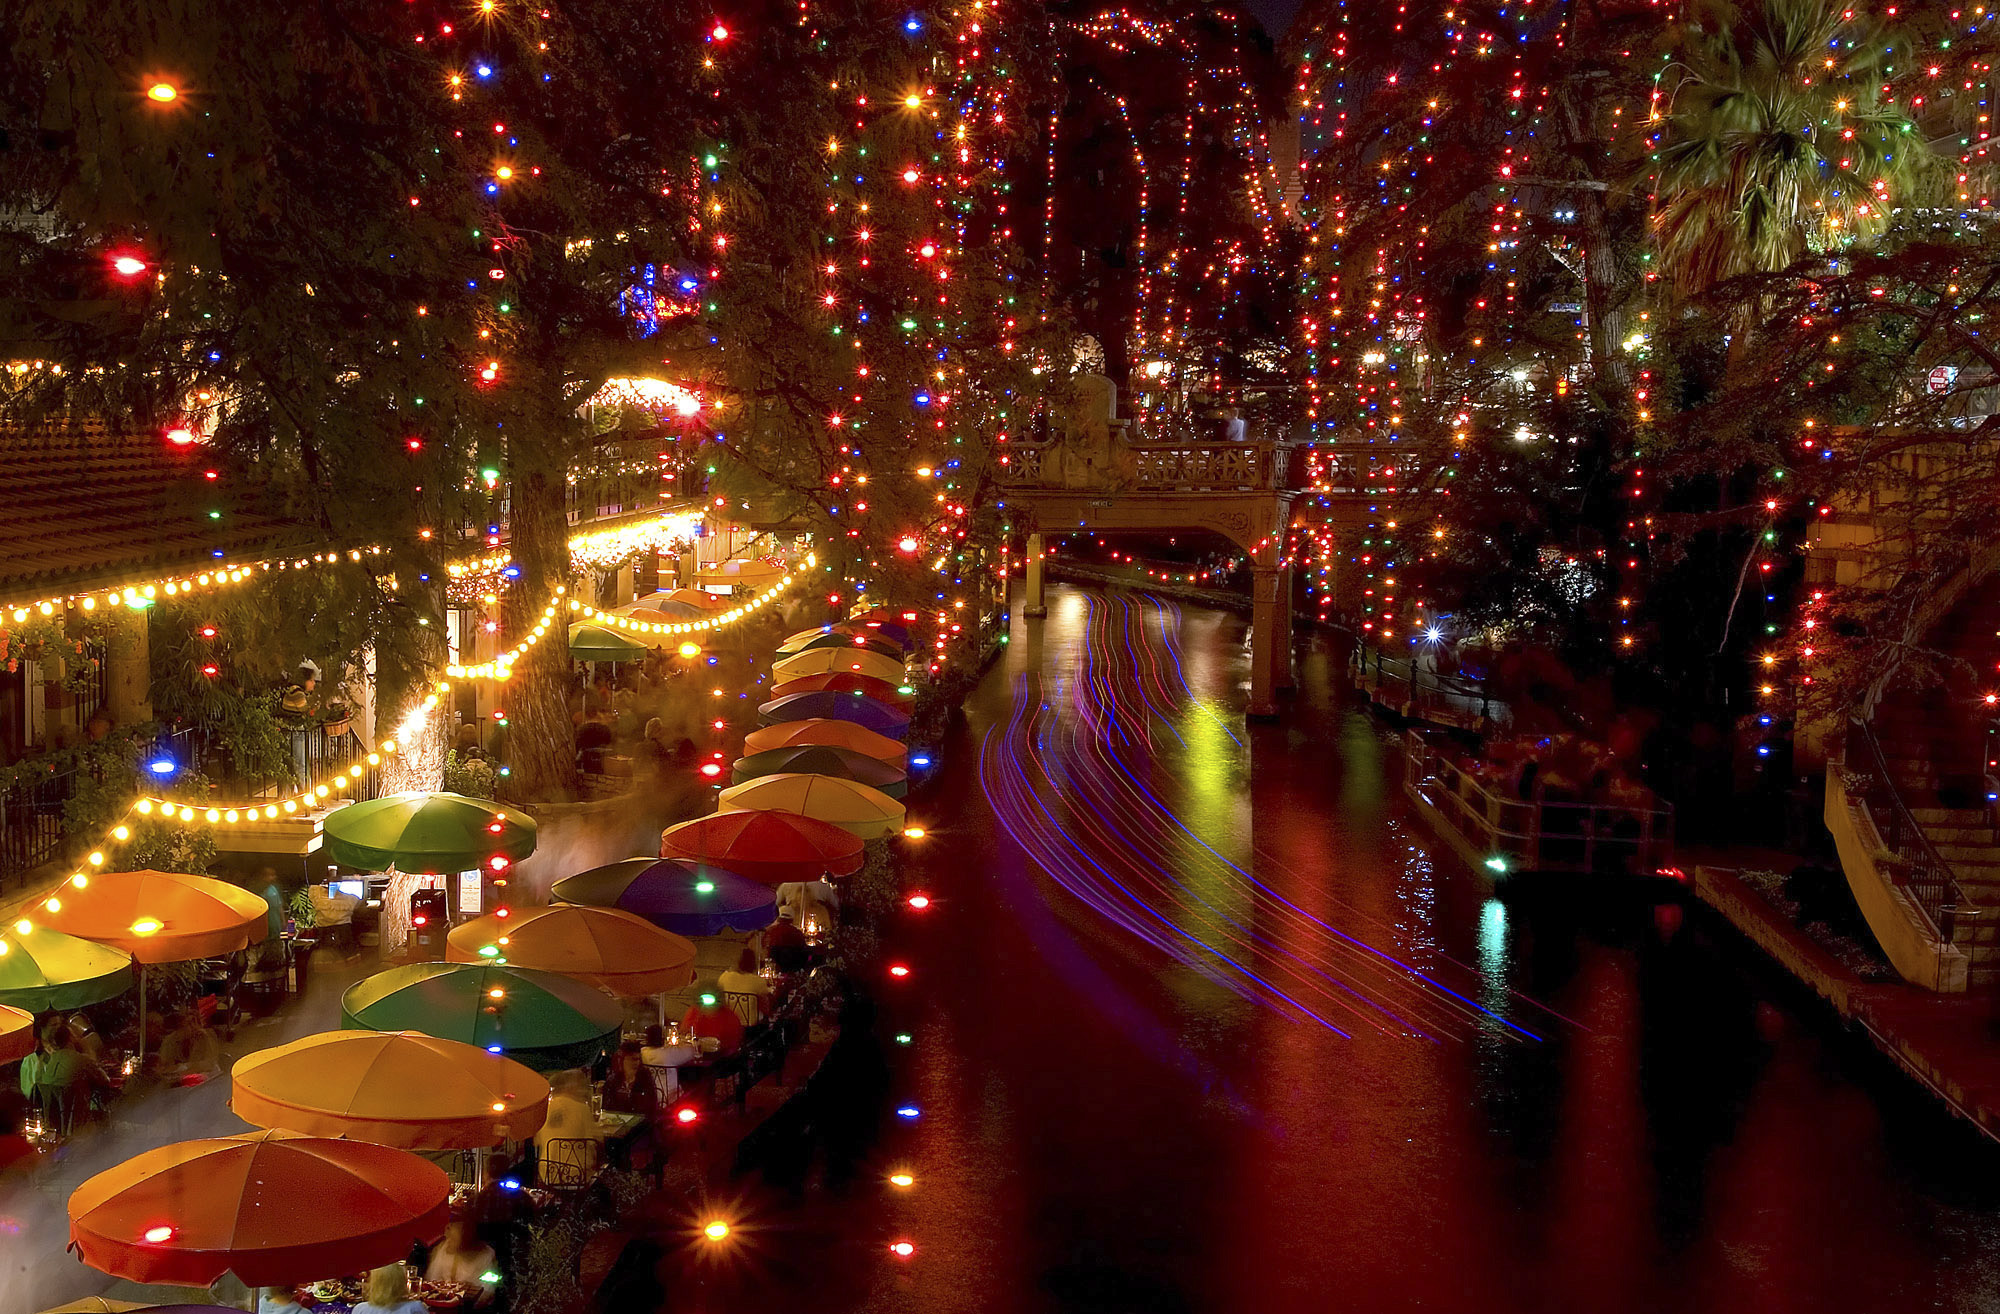 19 of the best places to see holiday lights in San Antonio, Central